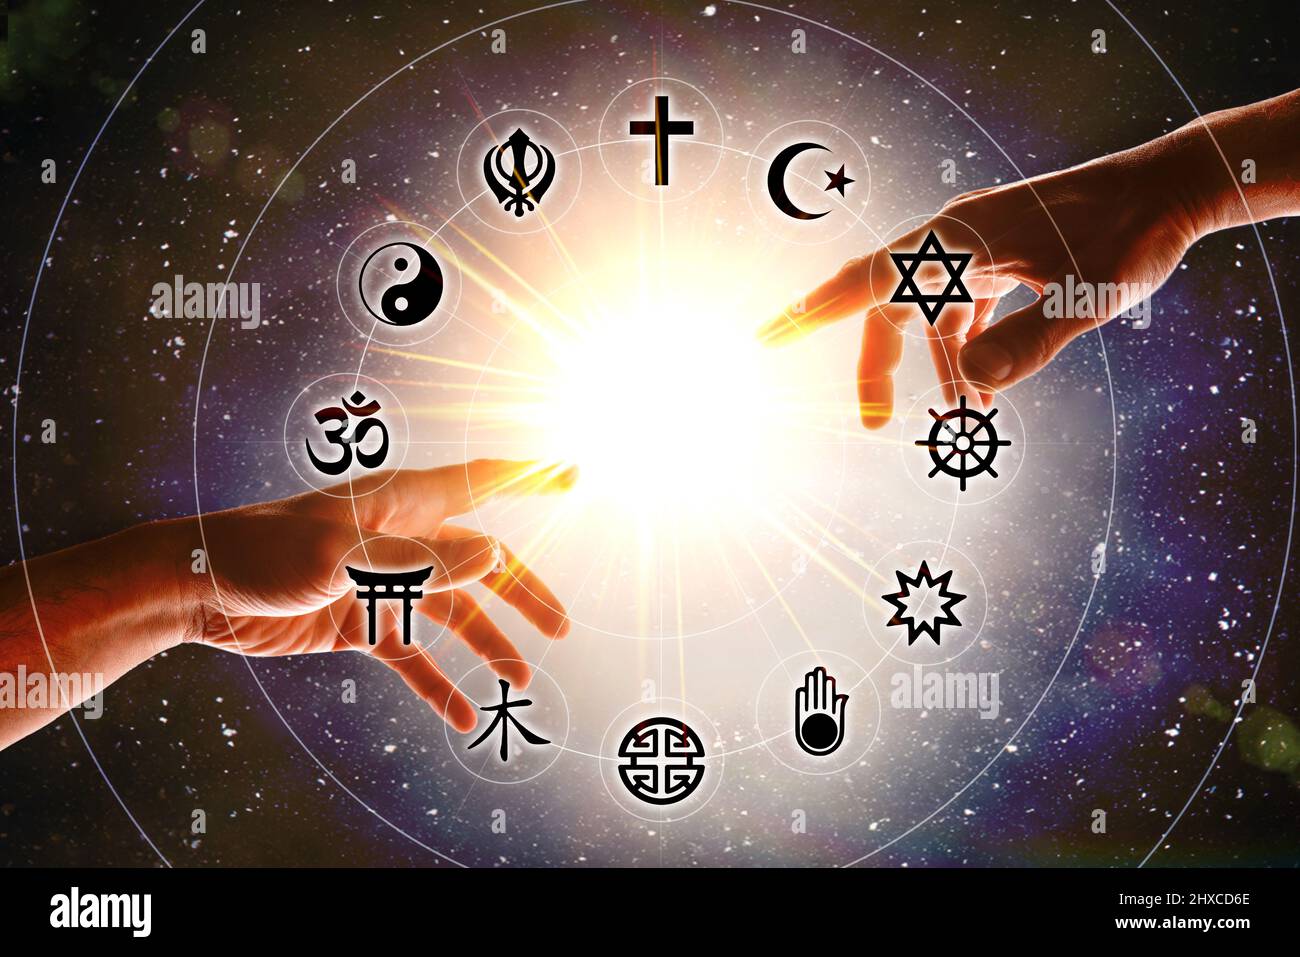 Hands and flash with symbols of the most representative religions in the world with a background of the universe. Stock Photo